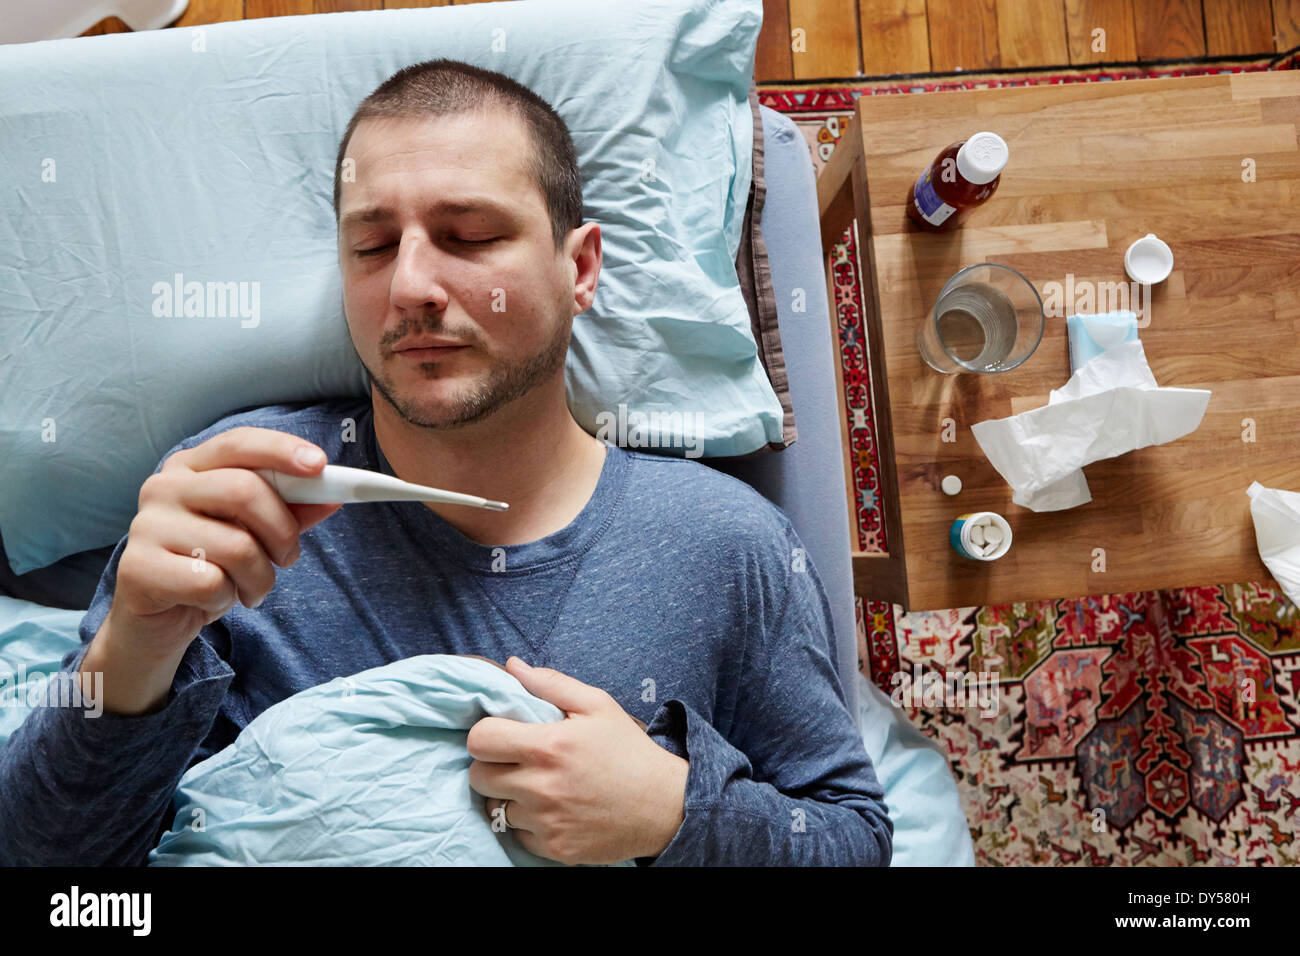 Mid adult man lying in bed looking at thermometer reading Stock Photo